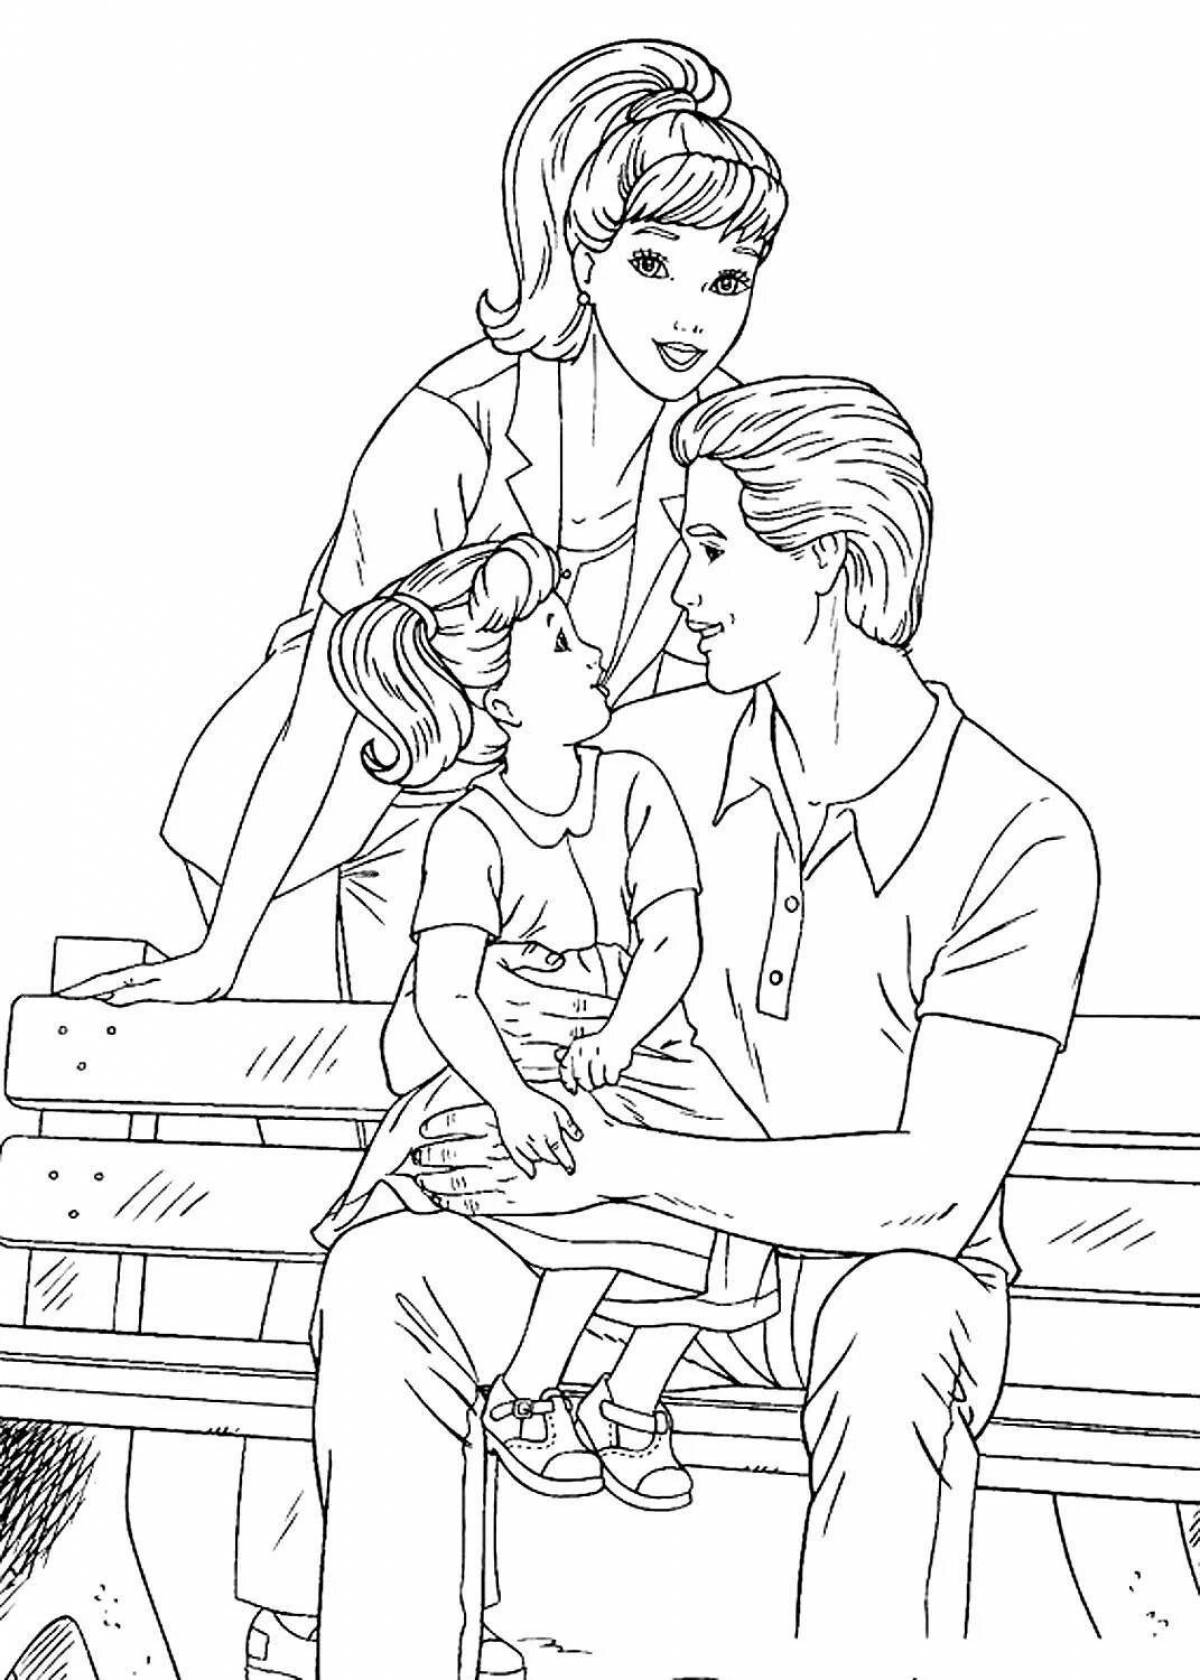 Adorable coloring photo of mom